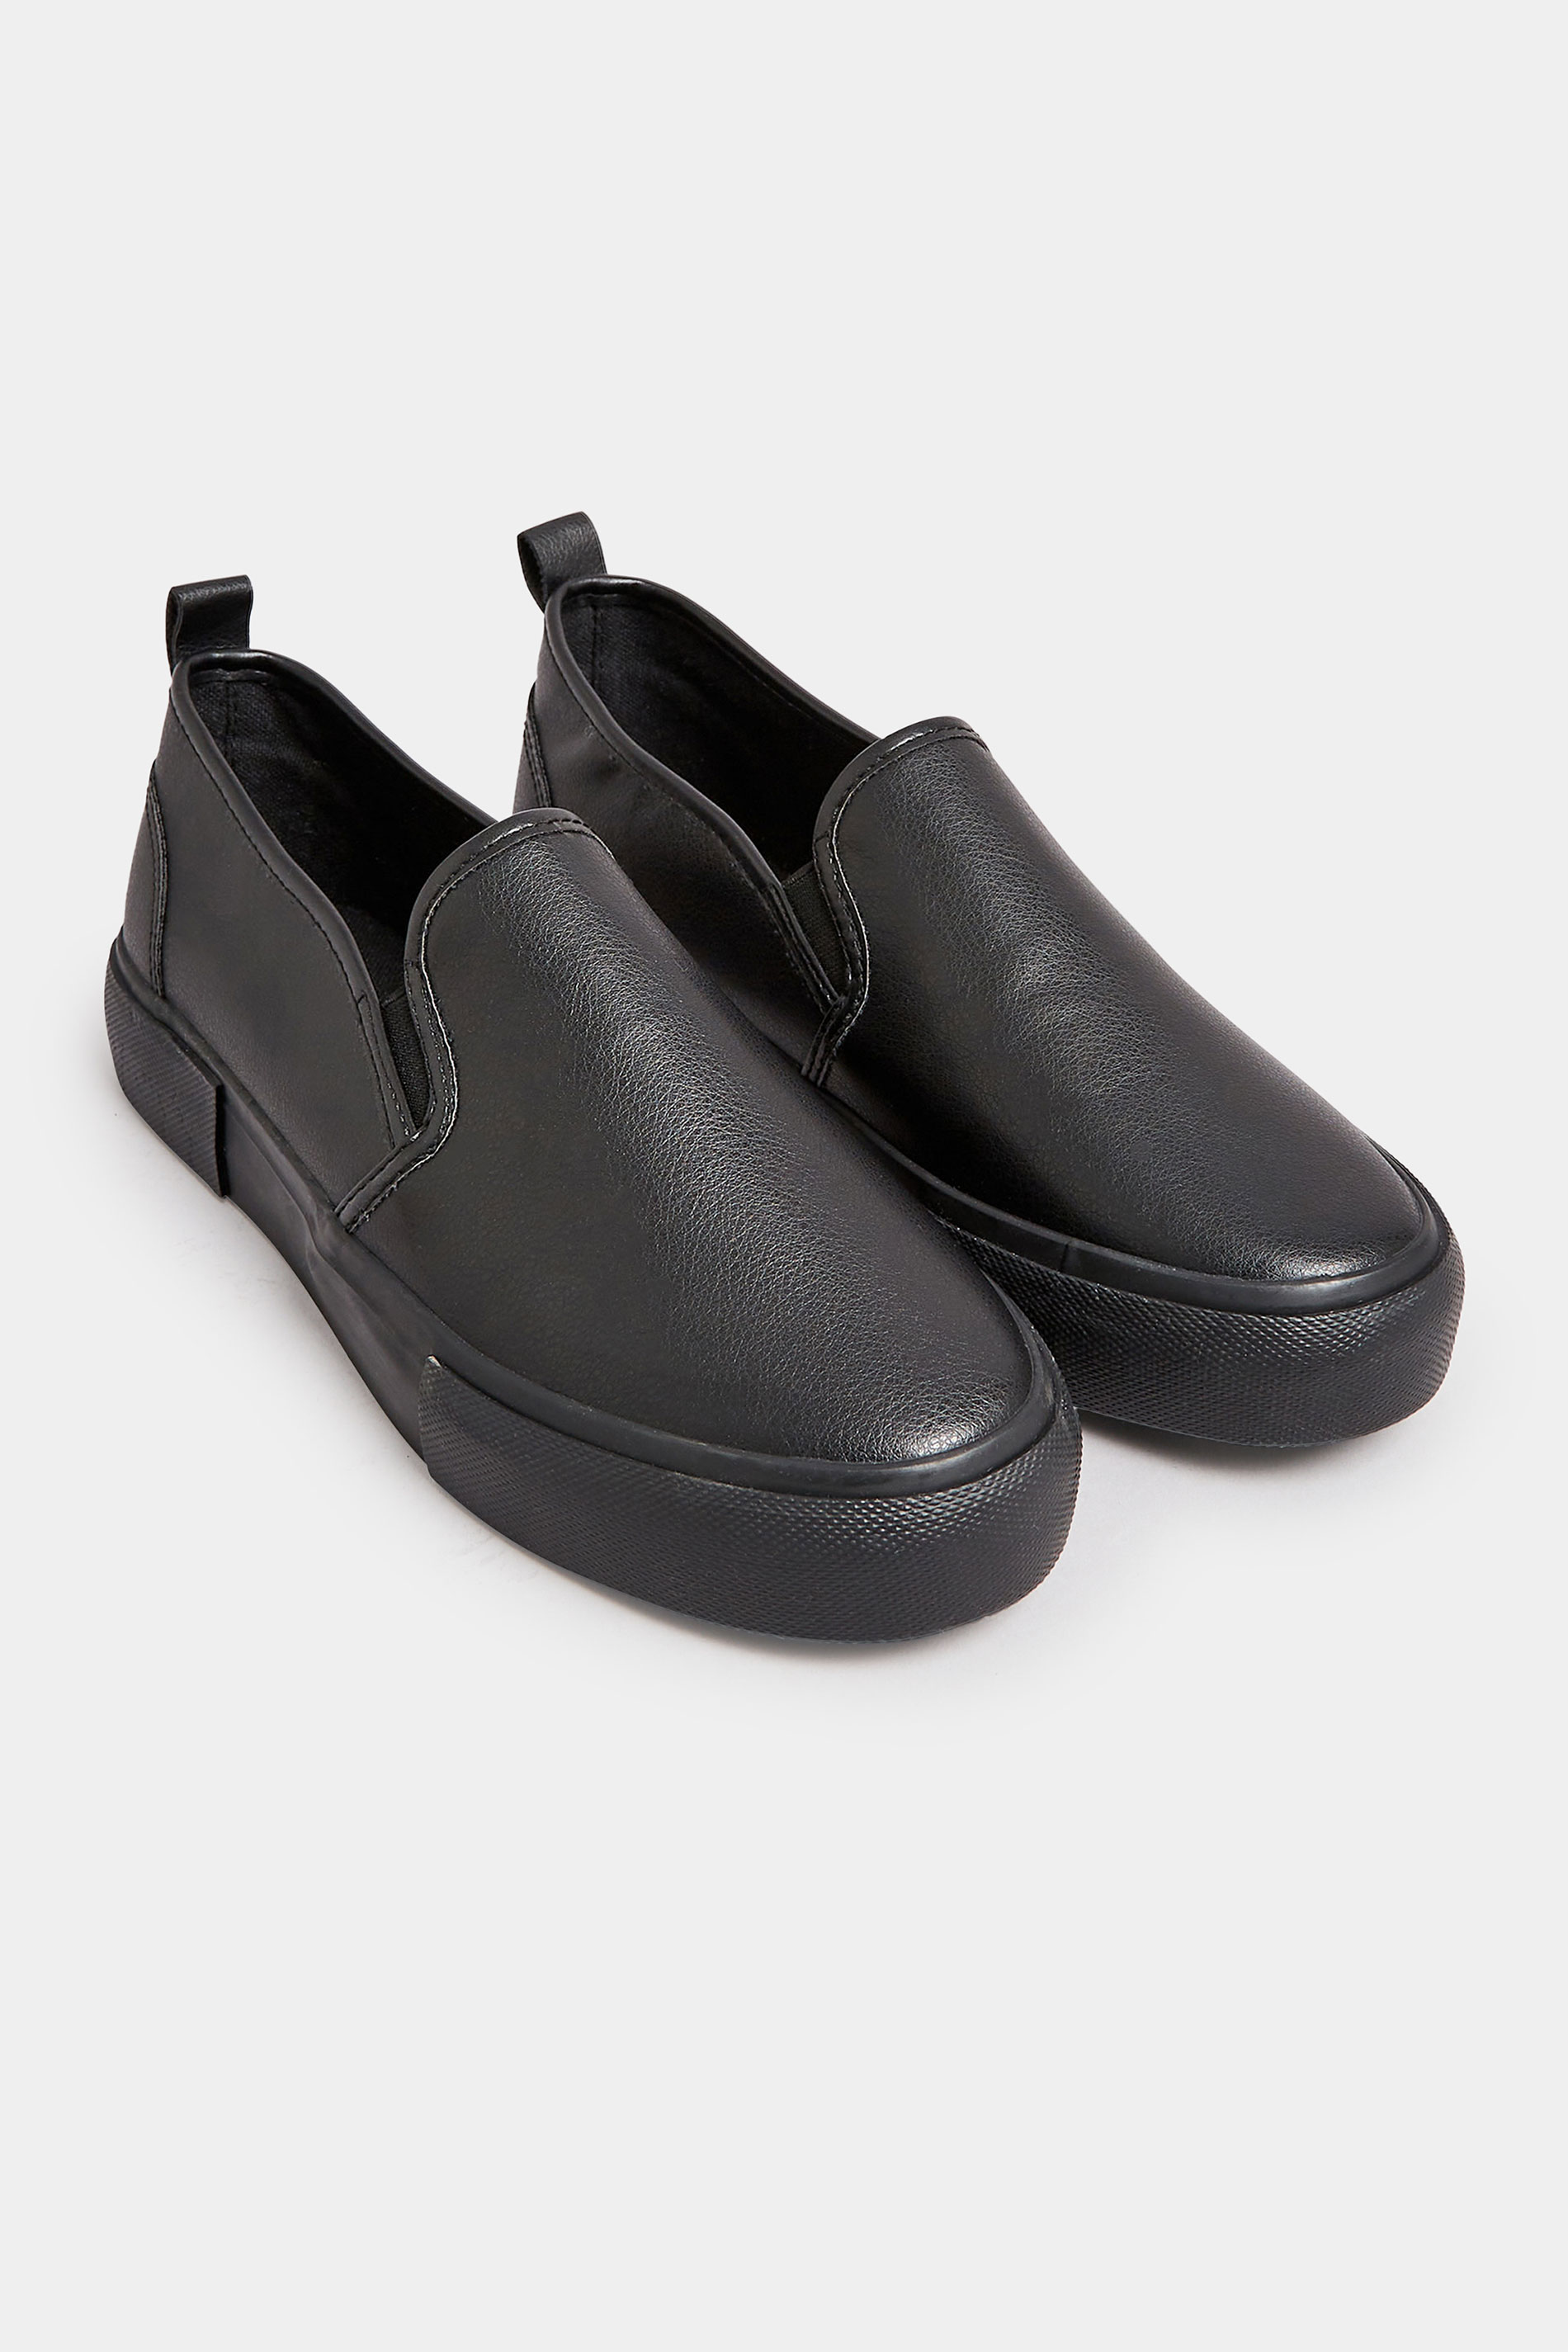 Black PU Slip On Trainers In Wide E Fit | Yours Clothing 2